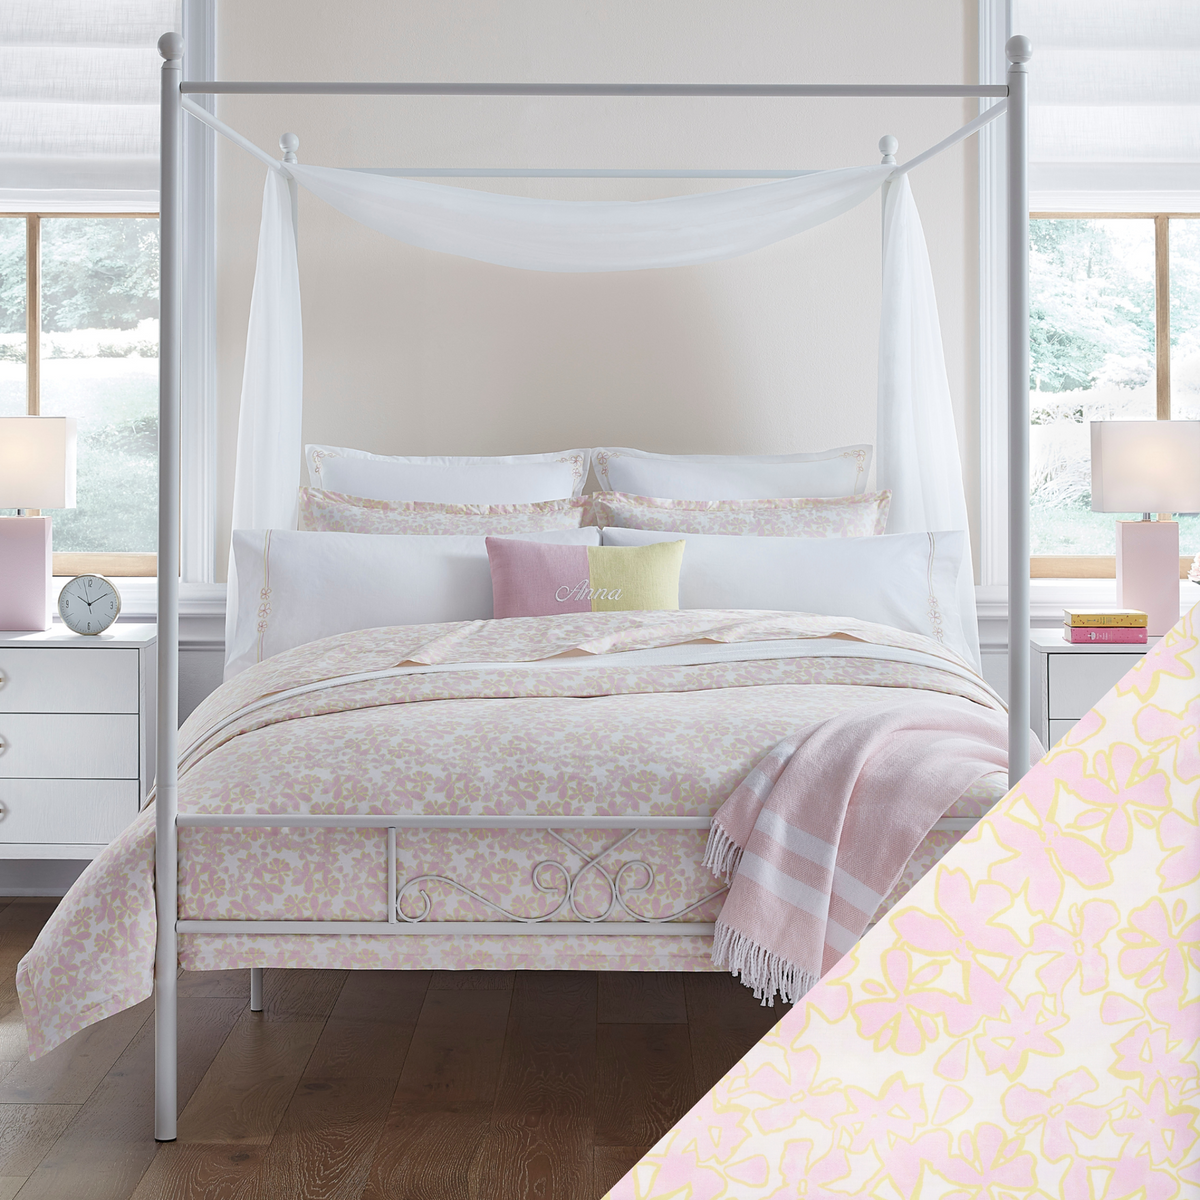 Full Lifestyle Image of Sferra Prato Bedding with Swatch of Carnation